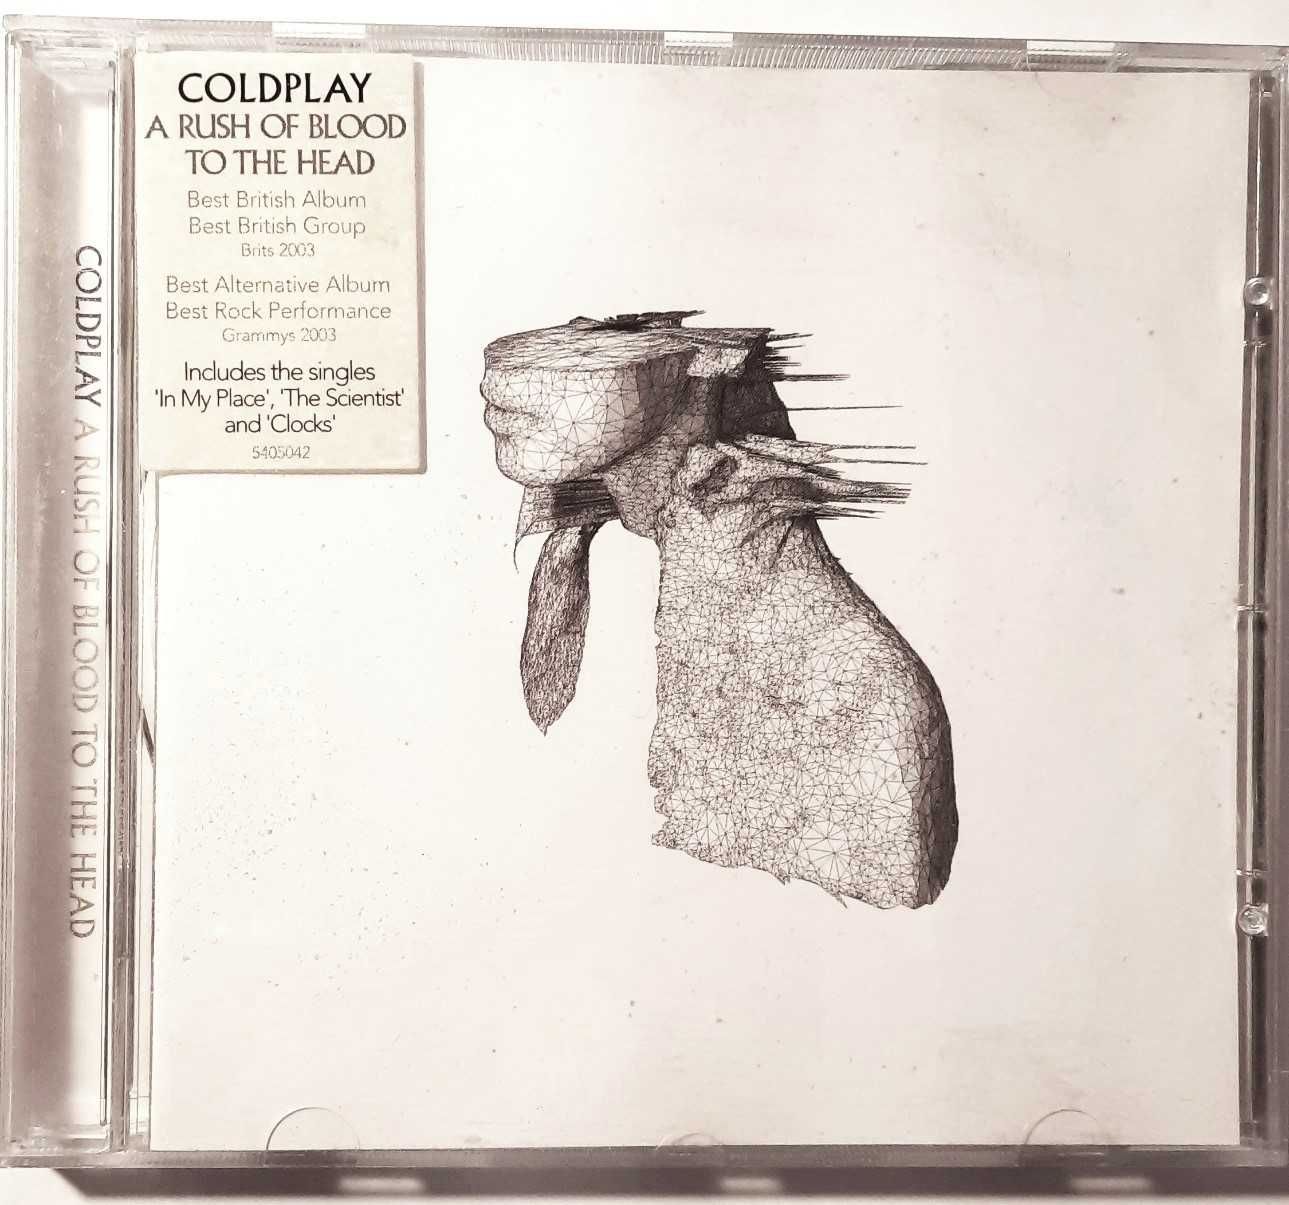 Coldplay CD 'A Rush of Blood to the Head' + DVD Concert 2003